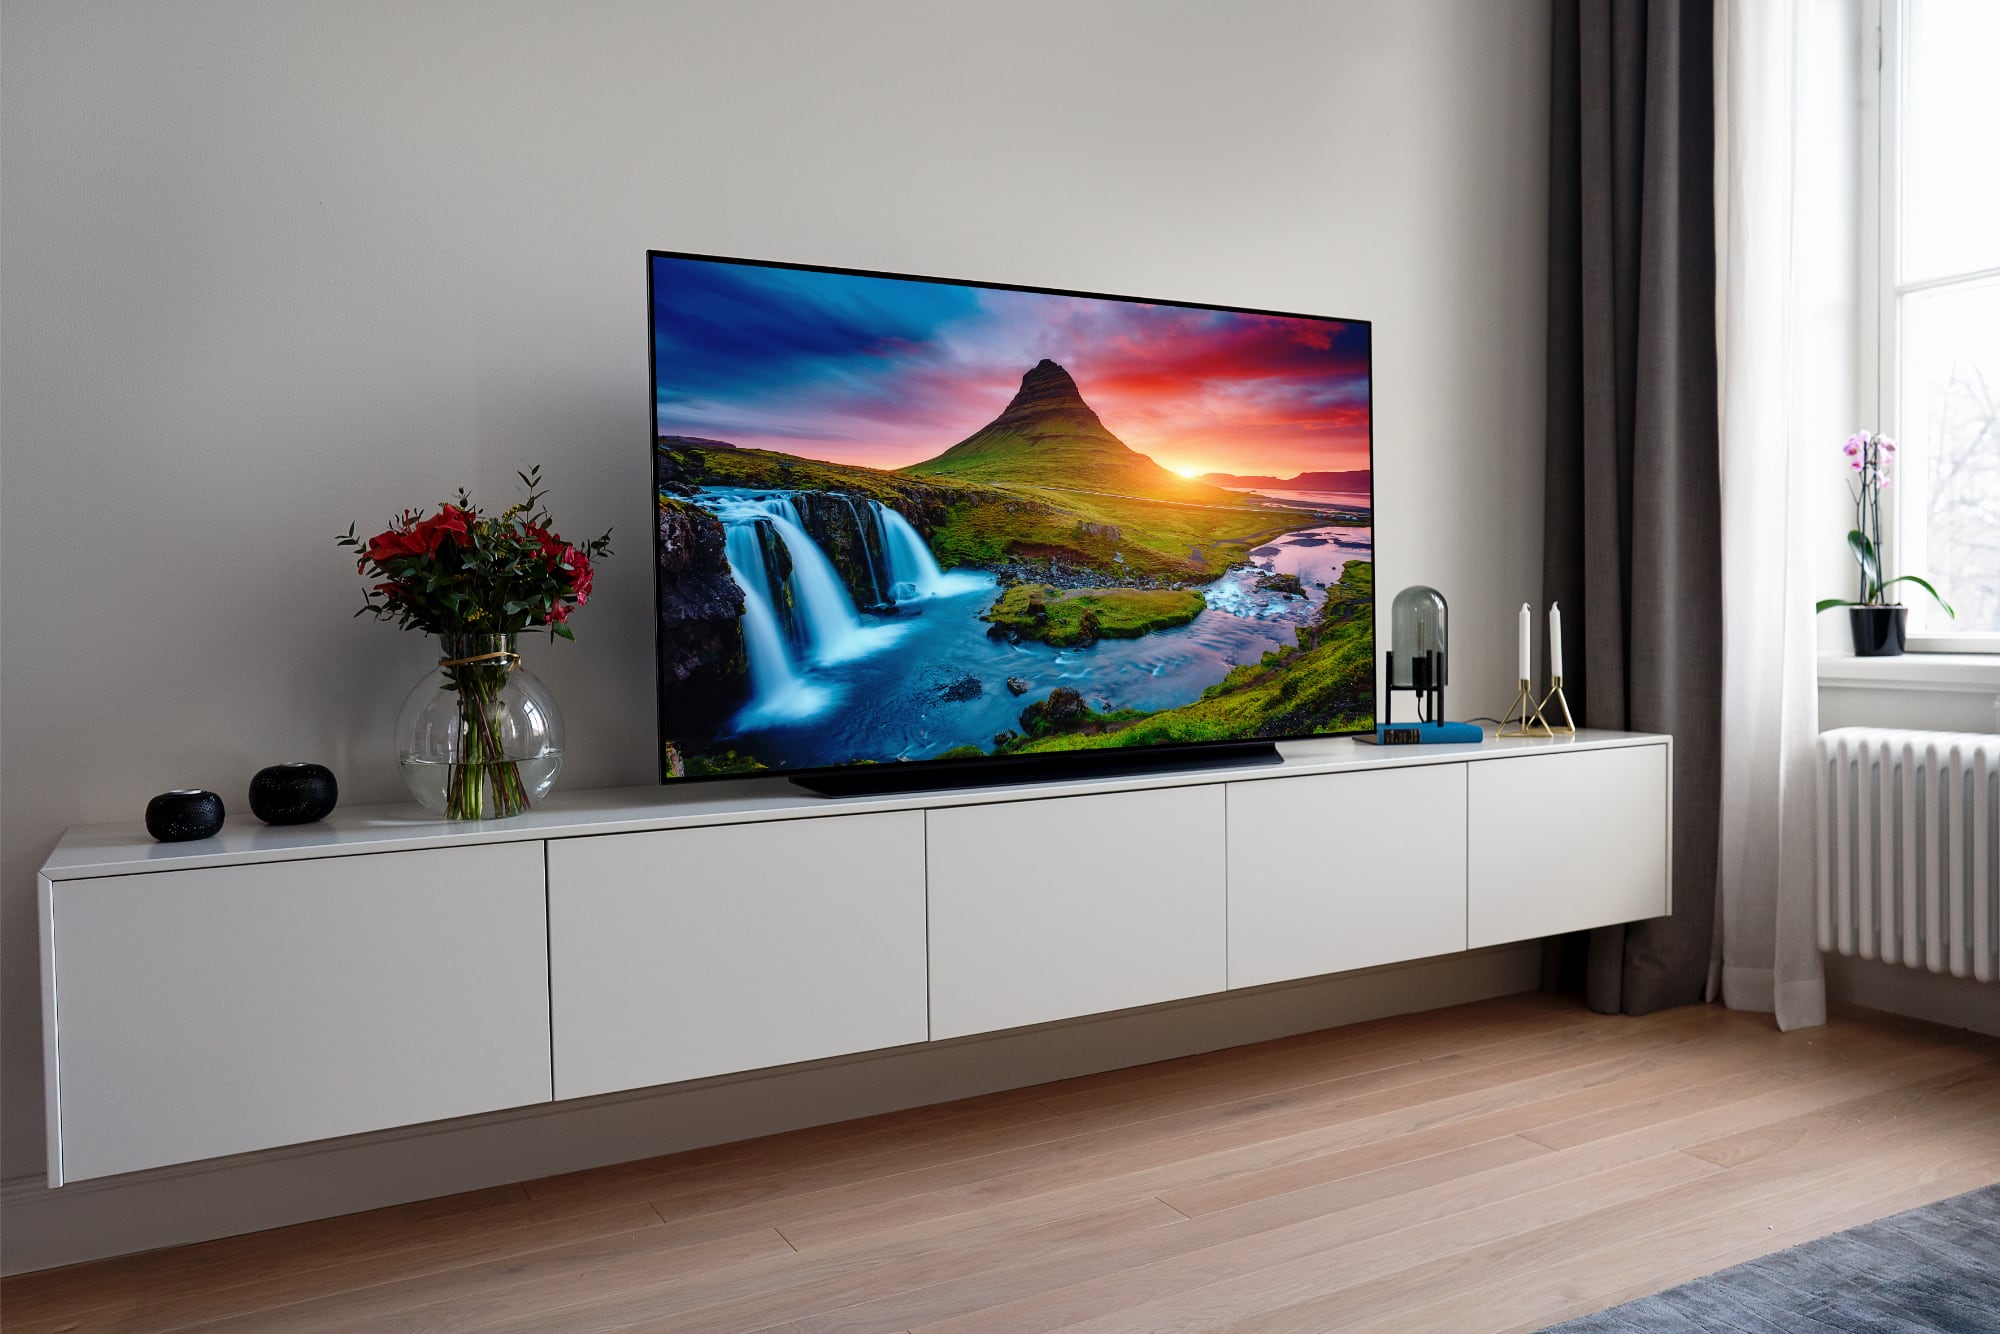 Buying Guide Available For Choosing The Best Television